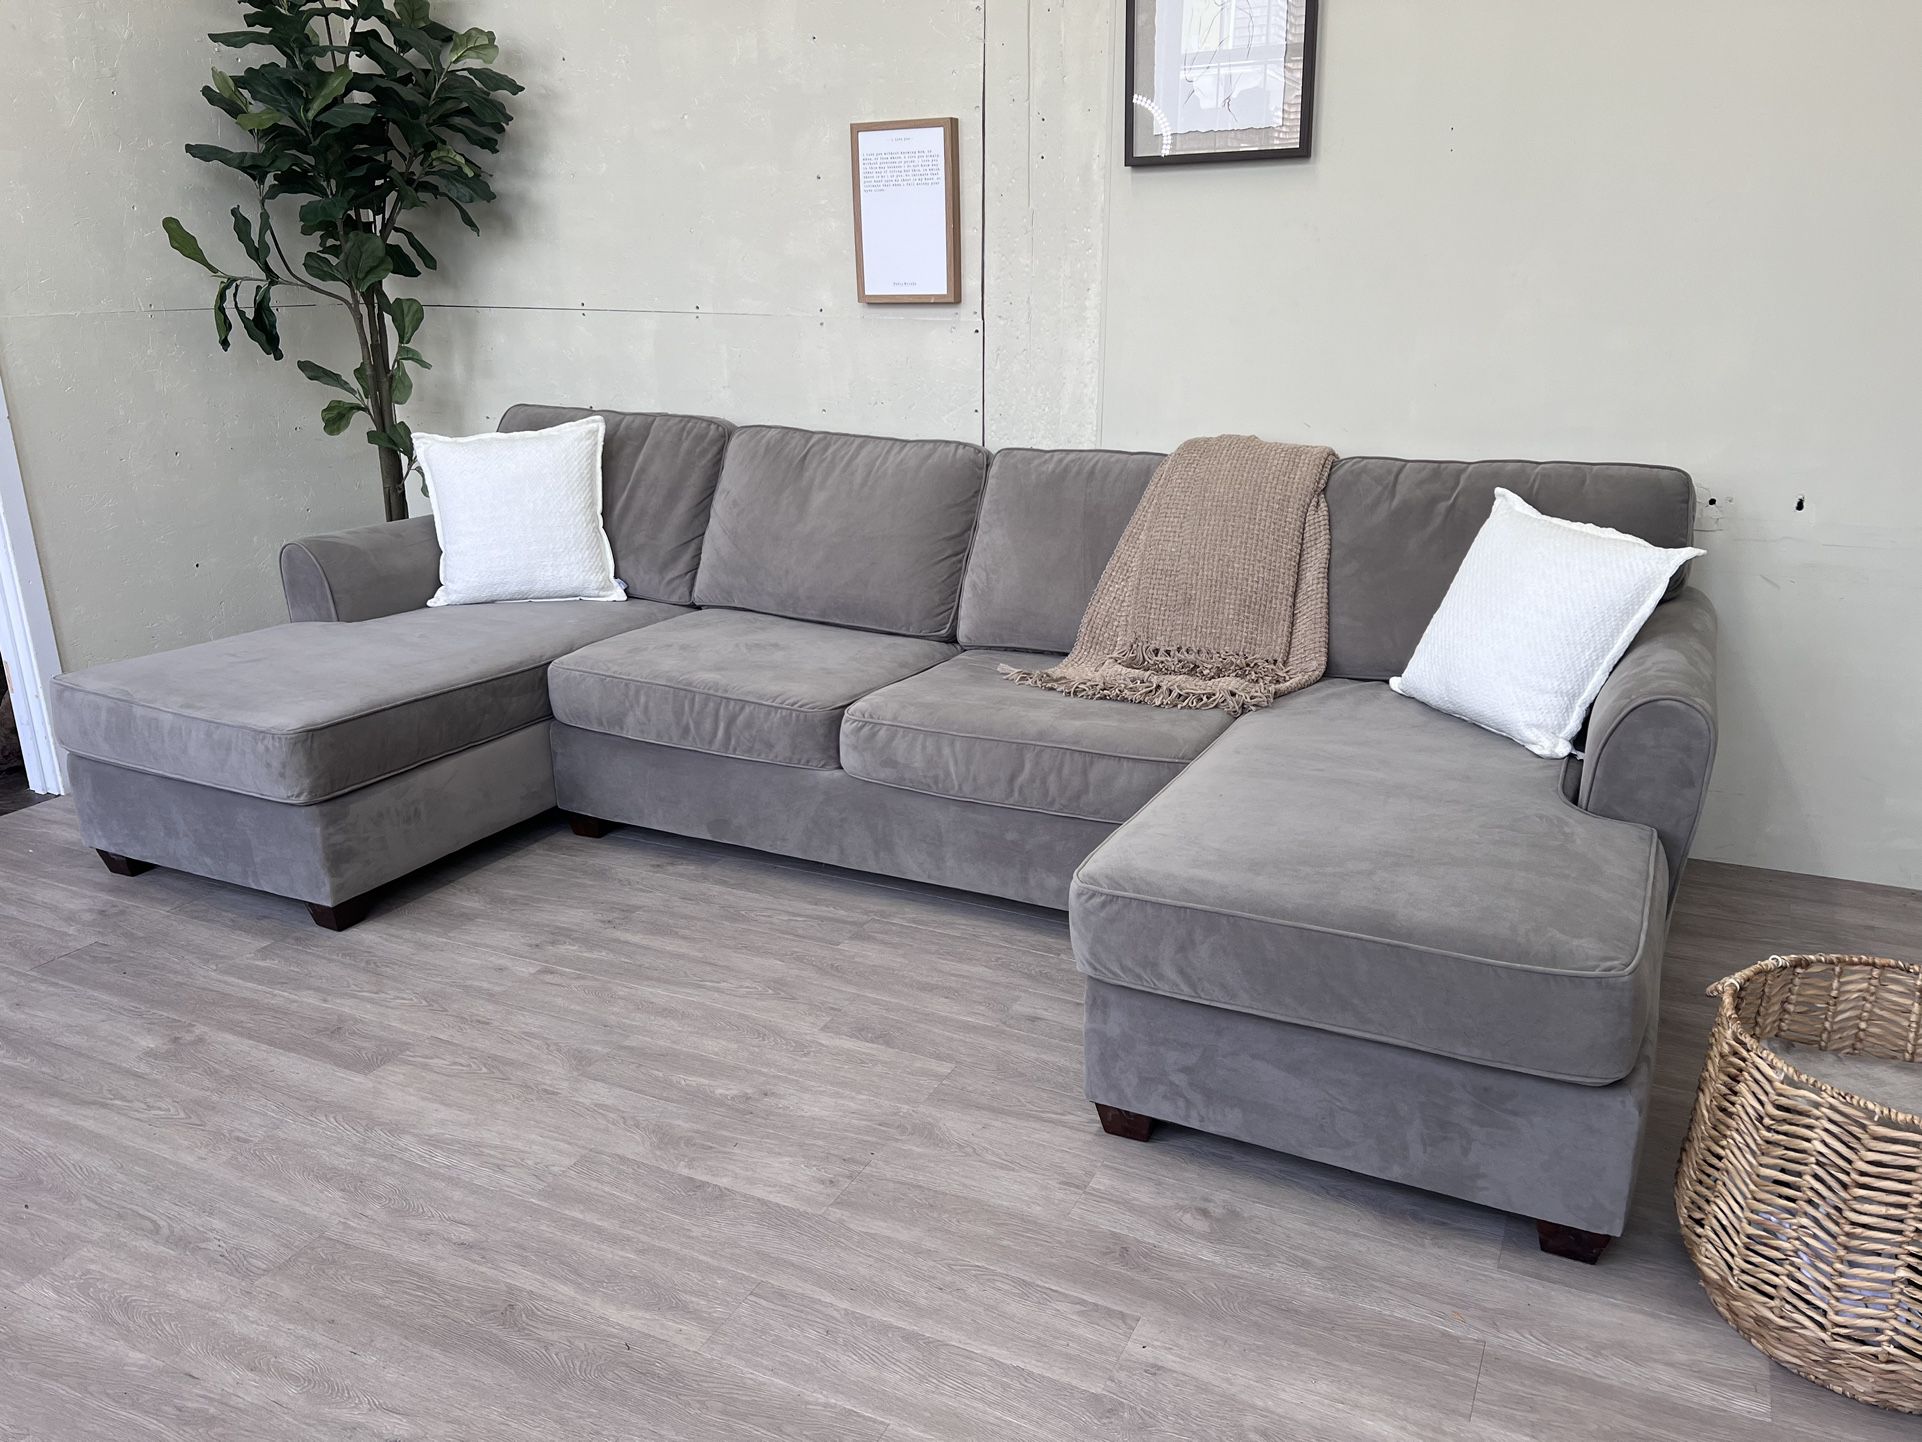 FREE DELIVERY! 🚚 - Jordan’s Furniture Bauhaus Gray Suede U Sectional Couch with 2 Chaises